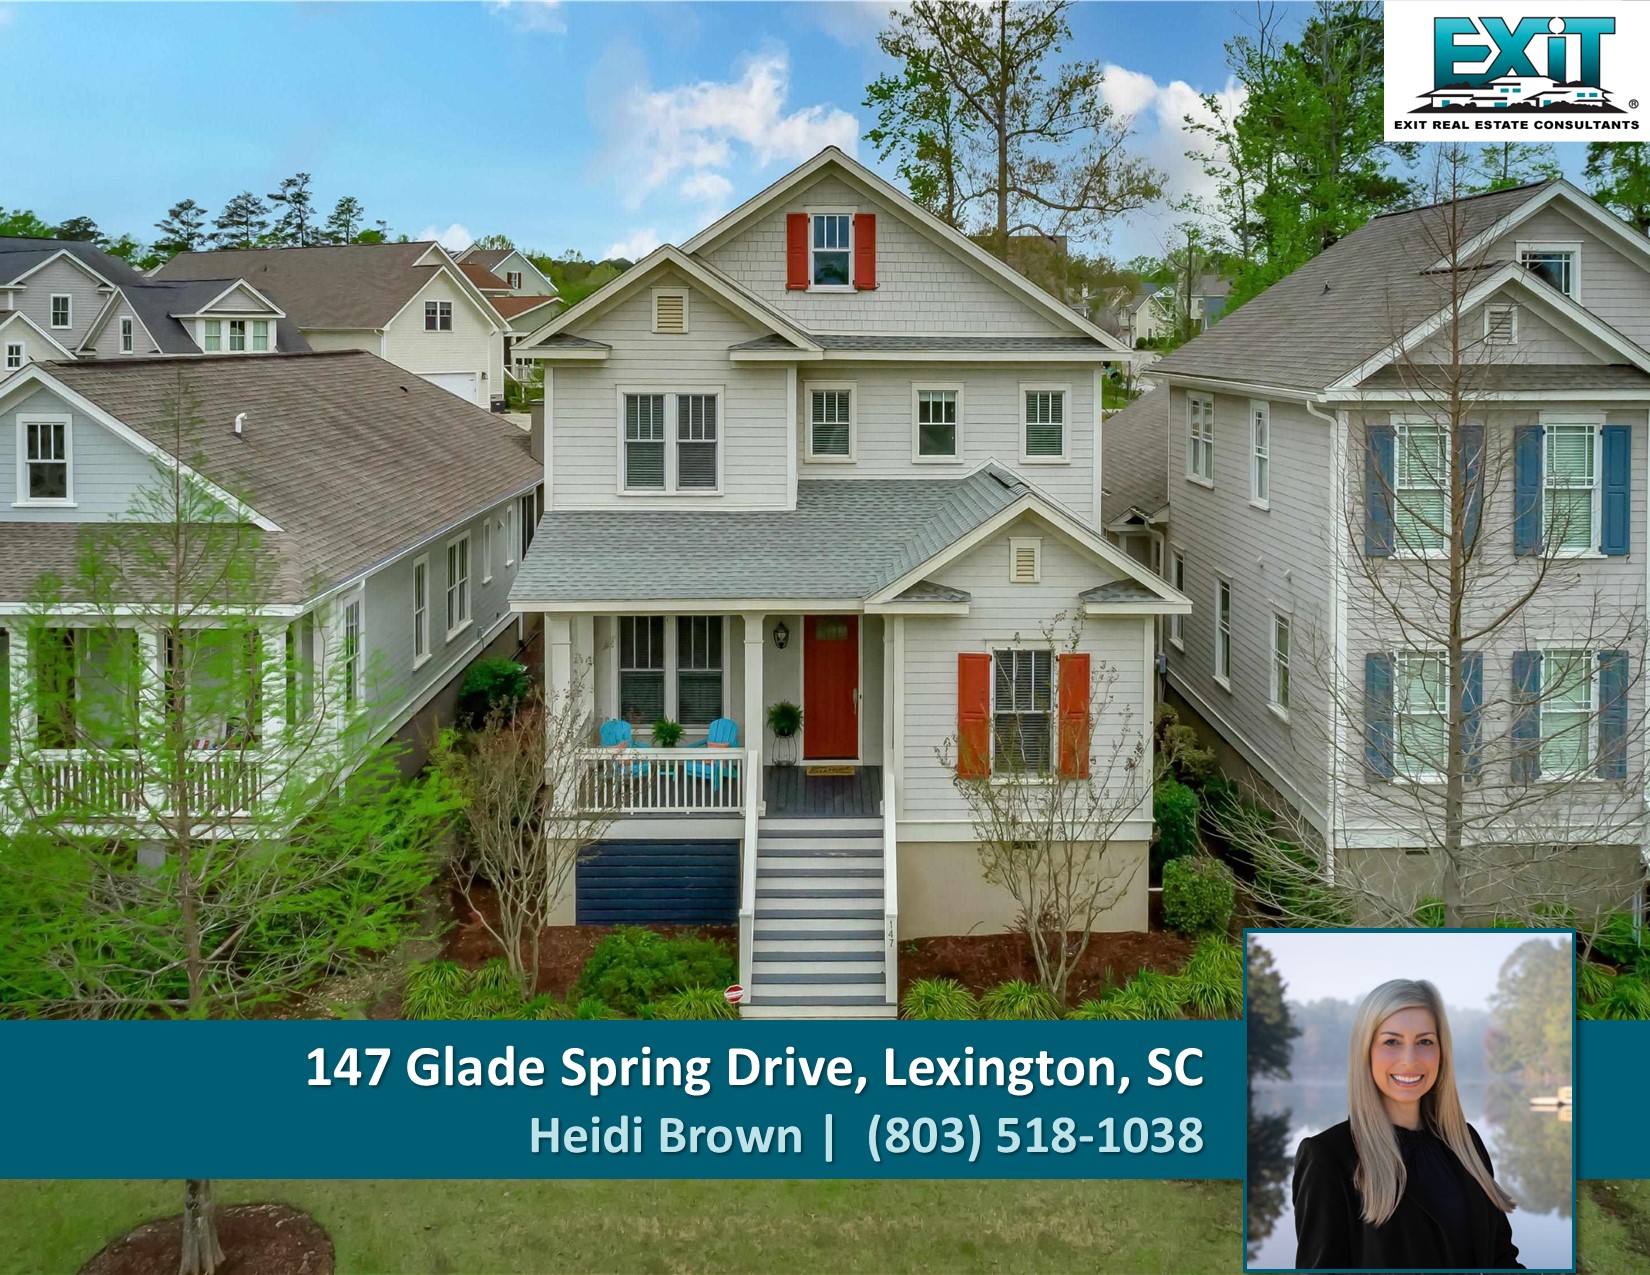 Just listed in the Saluda River Club